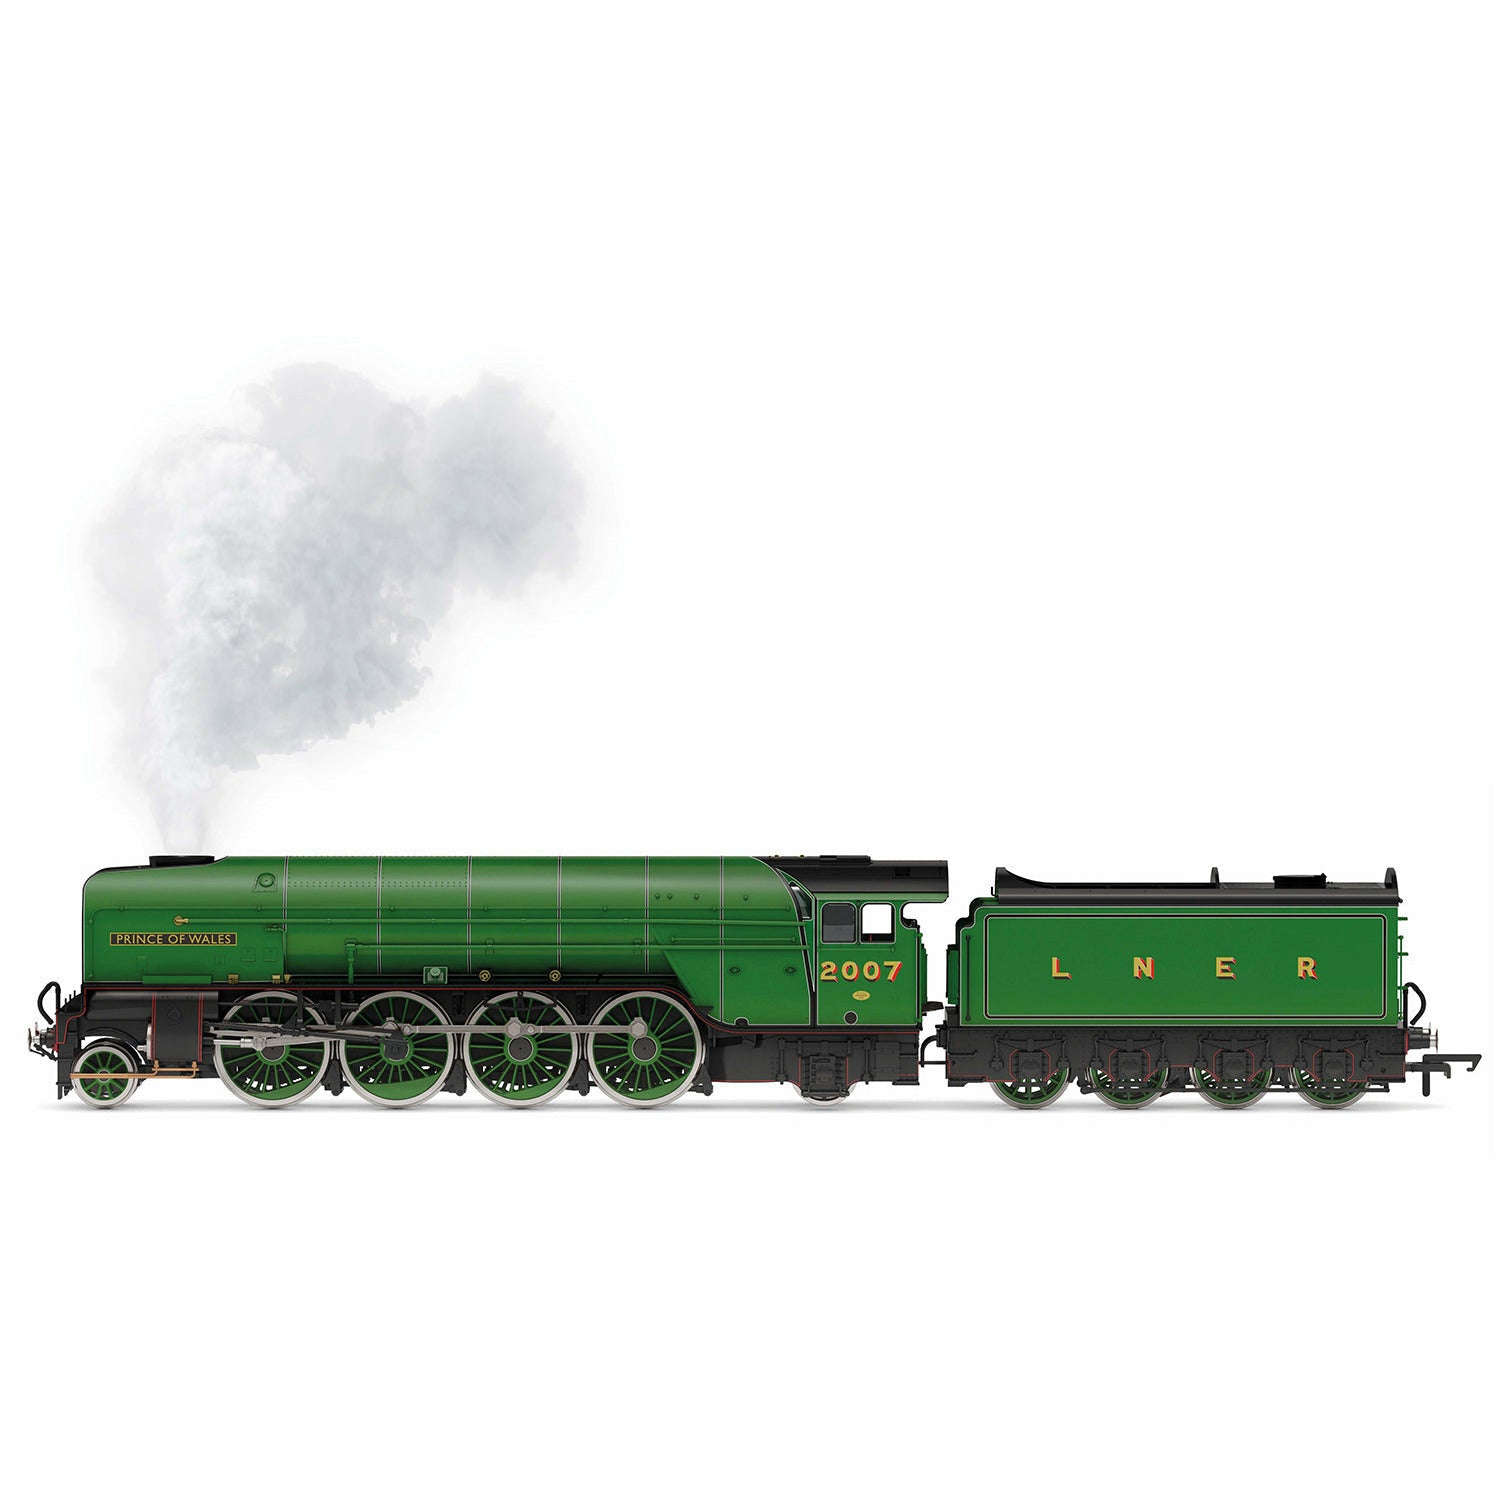 HORNBY LNER, P2 Class, 2-8-2, 2007 Prince of Wales With Steam Generator - Era 11